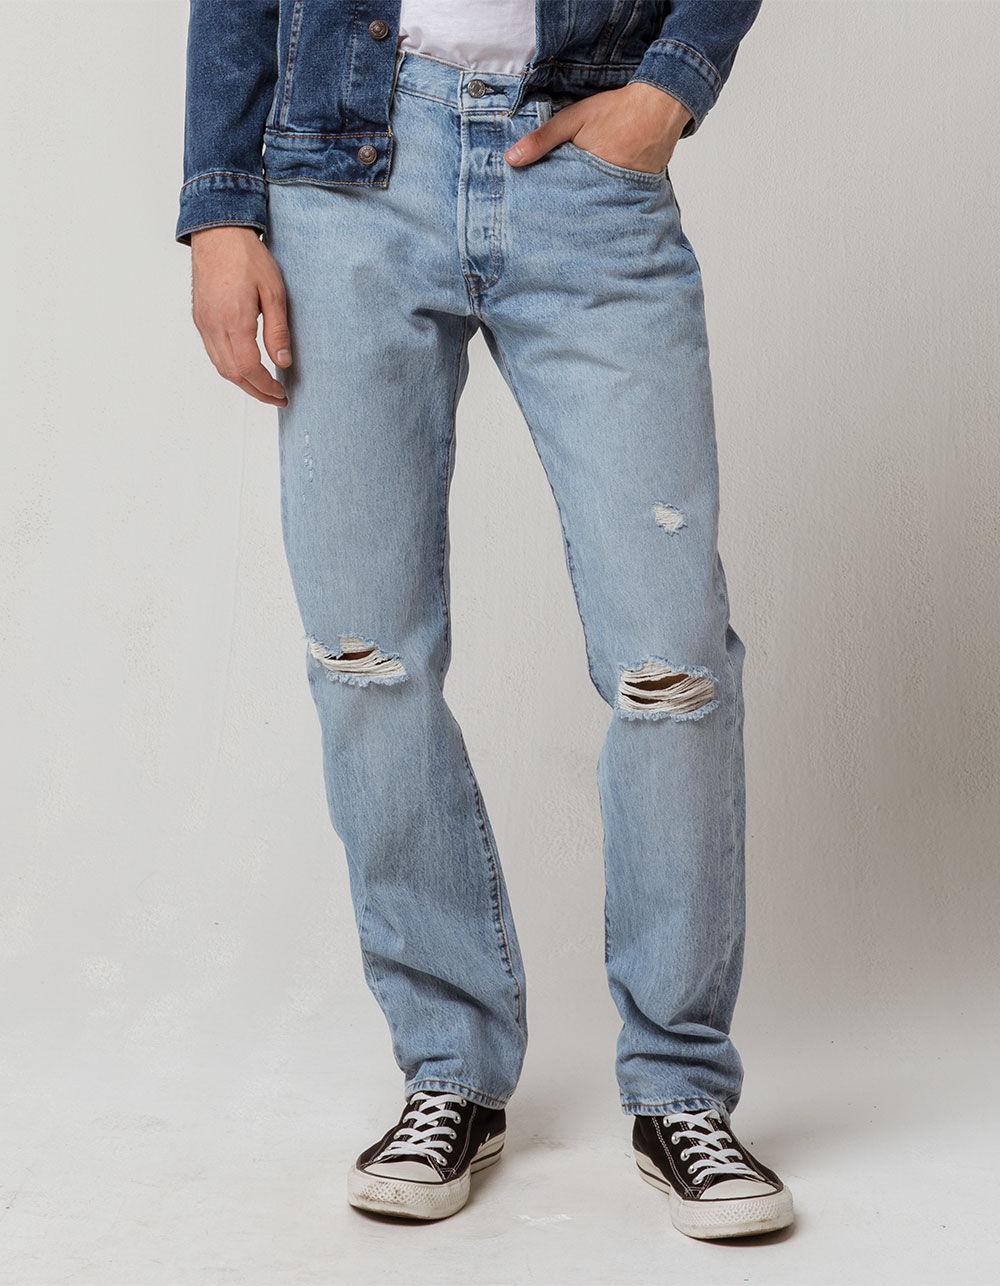 ripped levis jeans mens